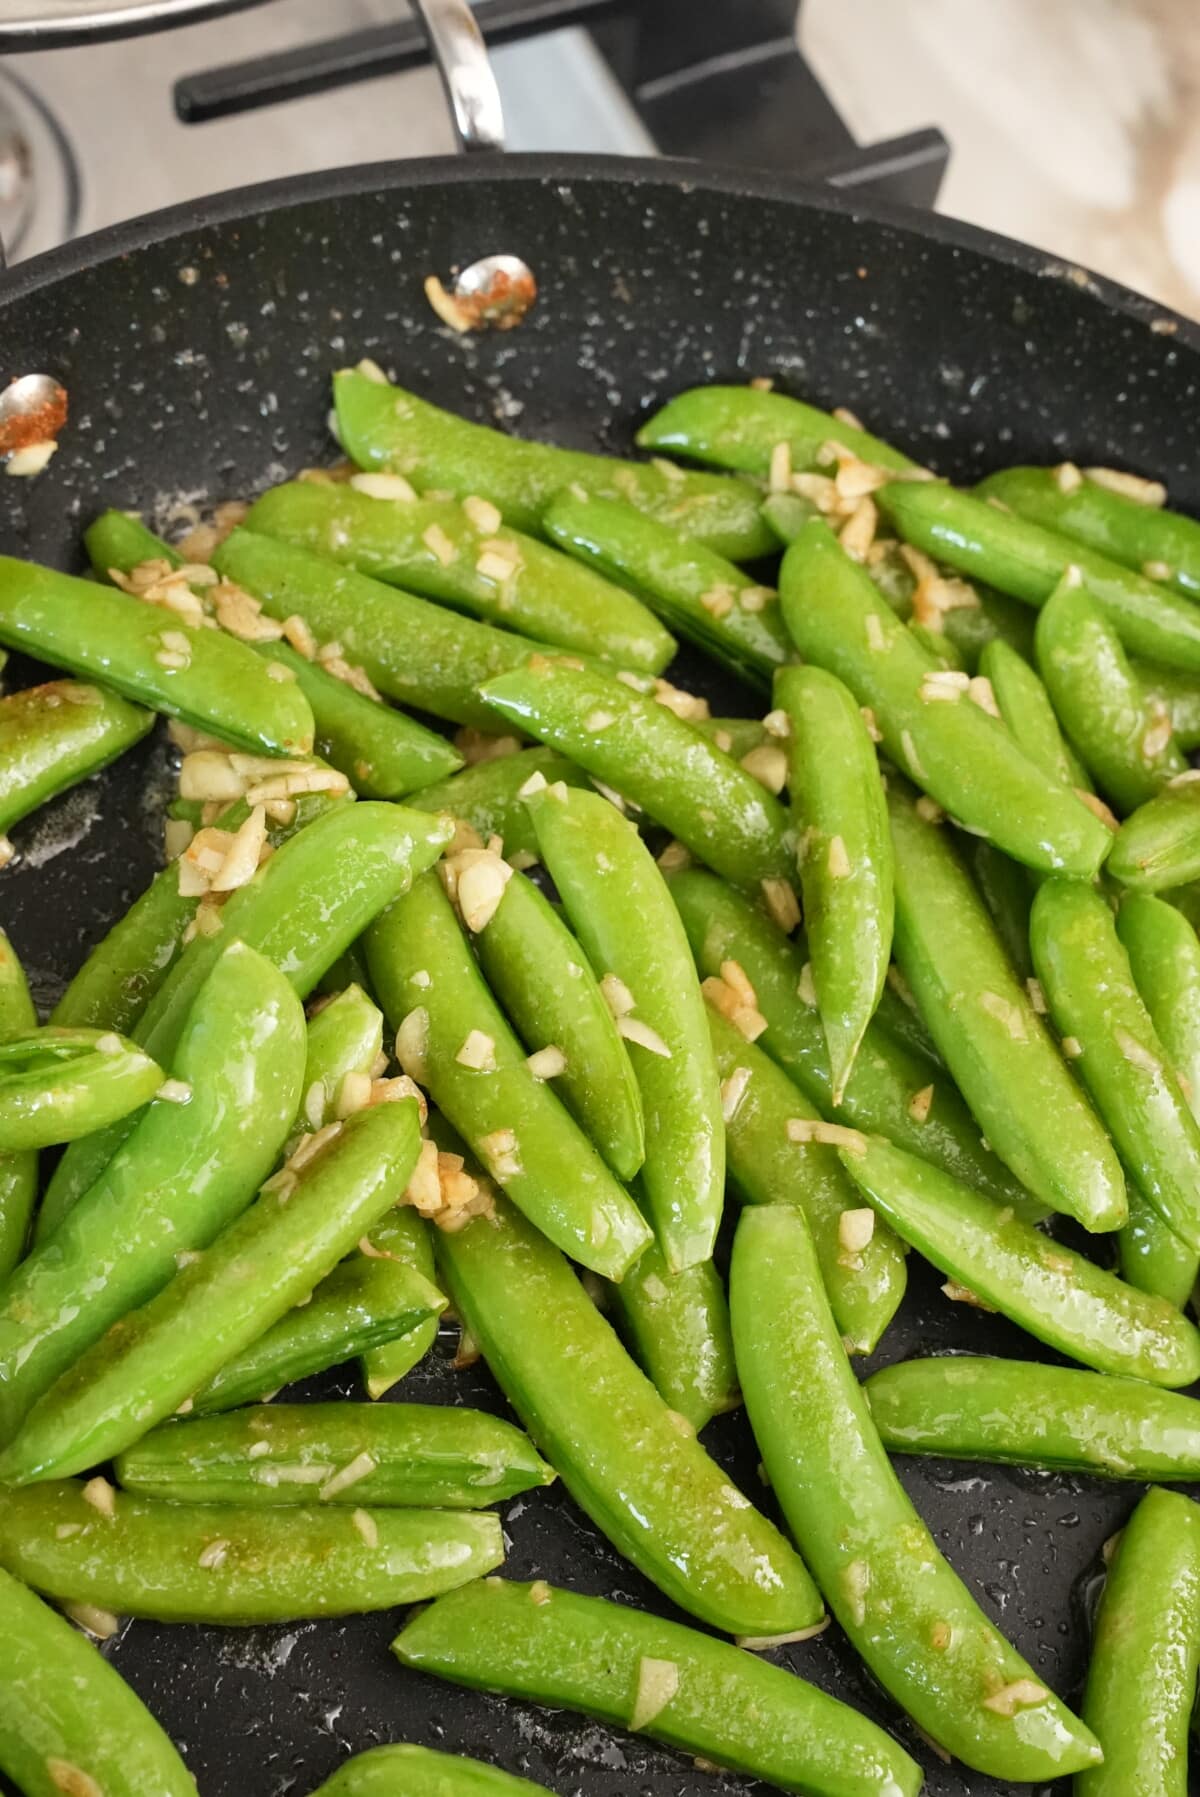 Garlic cooking with snap peas in a pan.